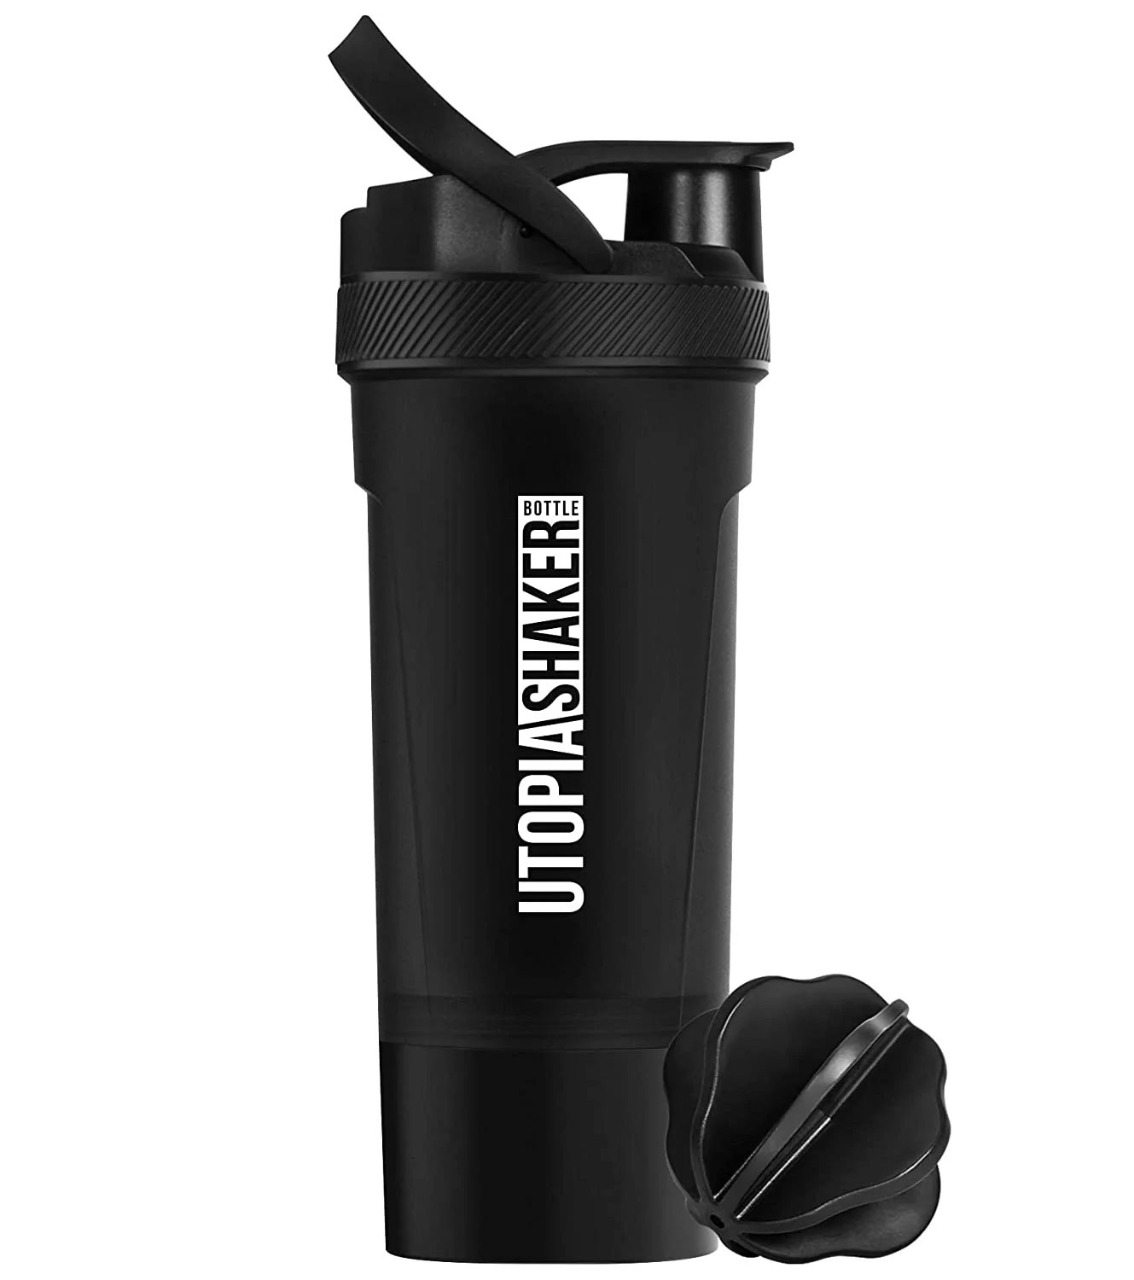 Utopia Home [2-pack] Classic Protein Mixer Shaker Bottle with Twist and Lock Protein Box Storage (24-Oz)